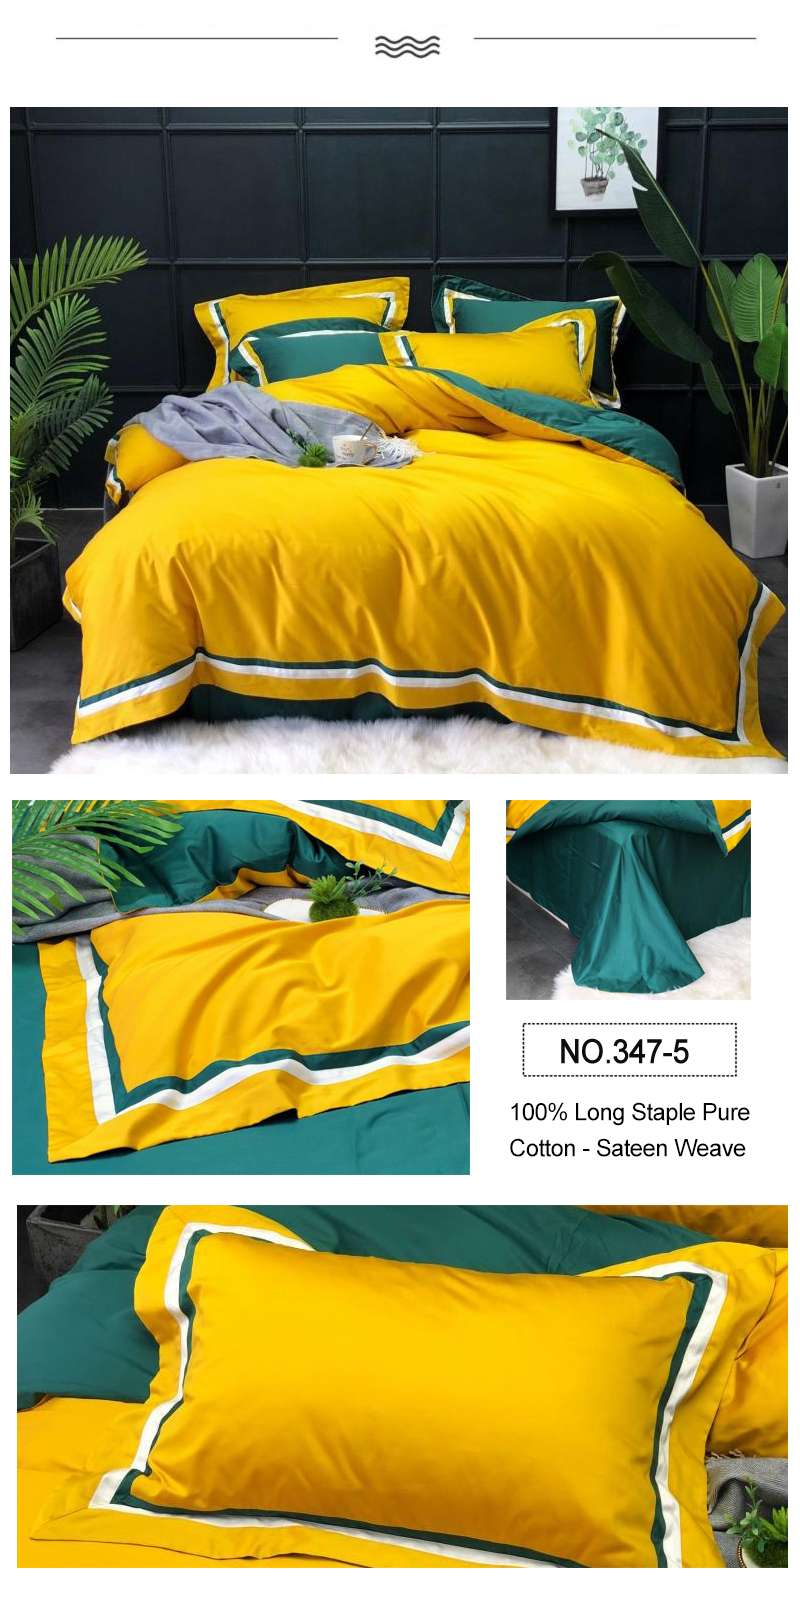 Highest Quality Bedding Deluxe